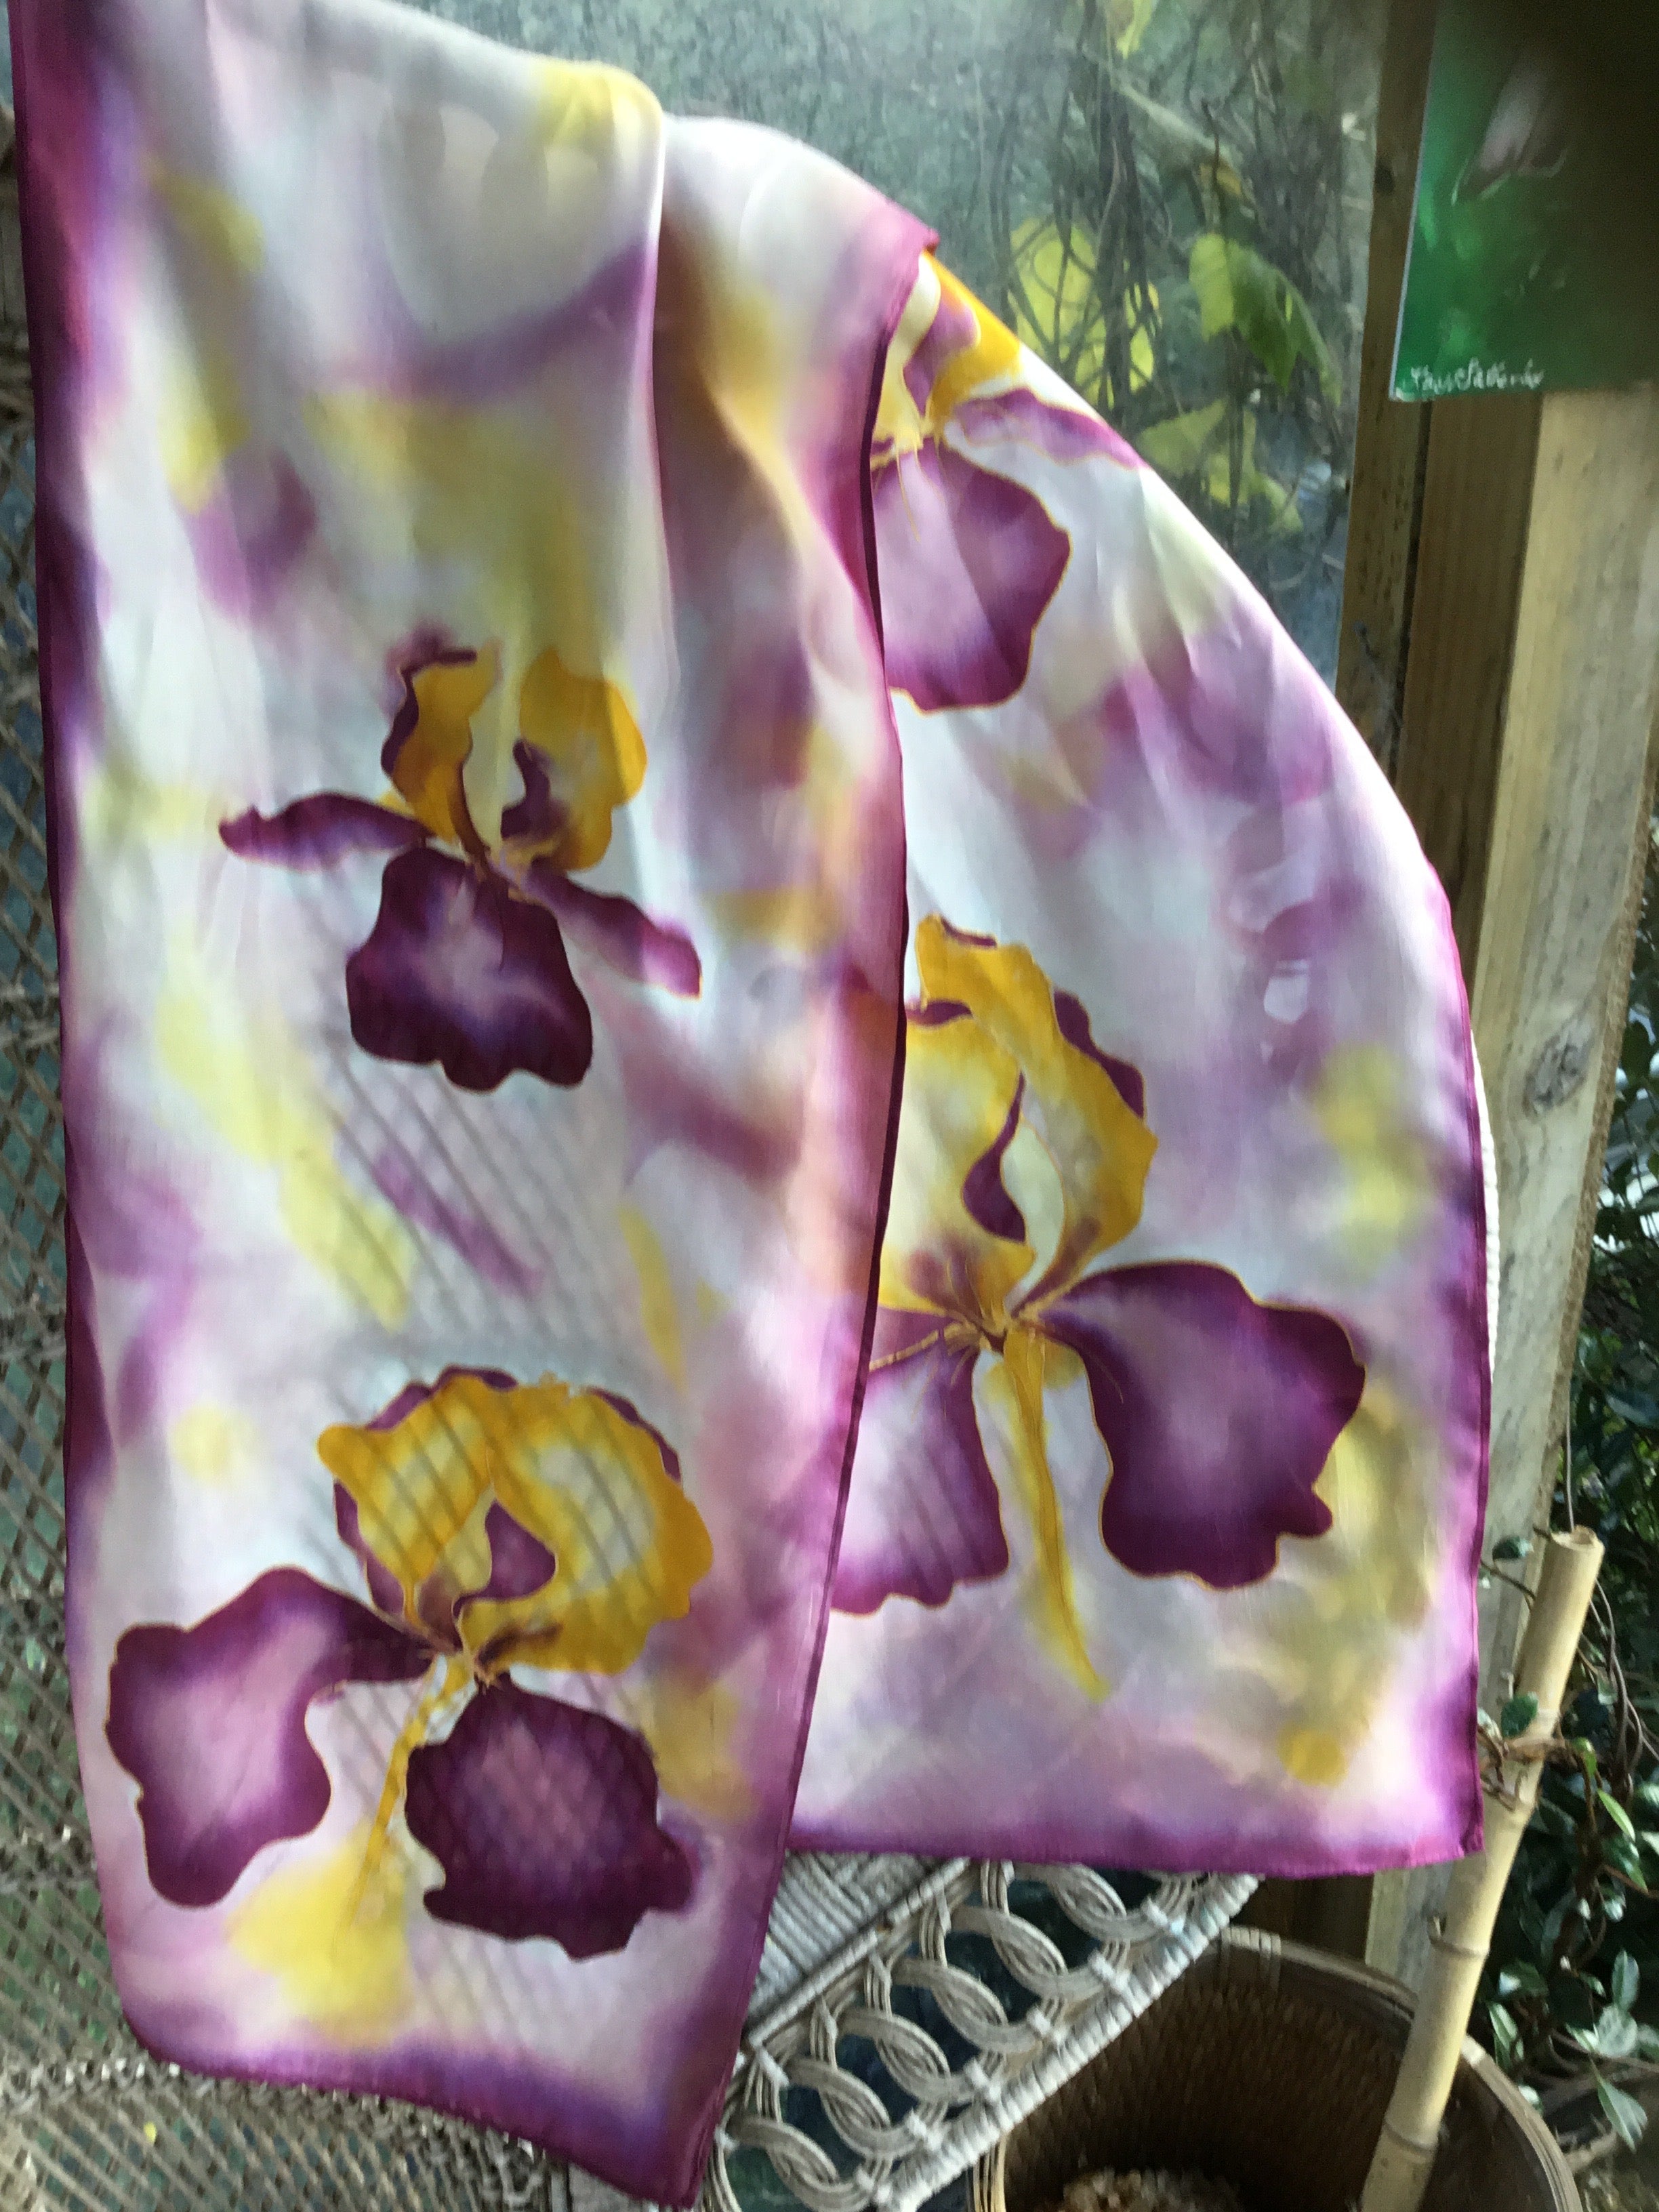 Iris Flowers in Burgundy and mustard Gold - Hand painted Silk Scarf